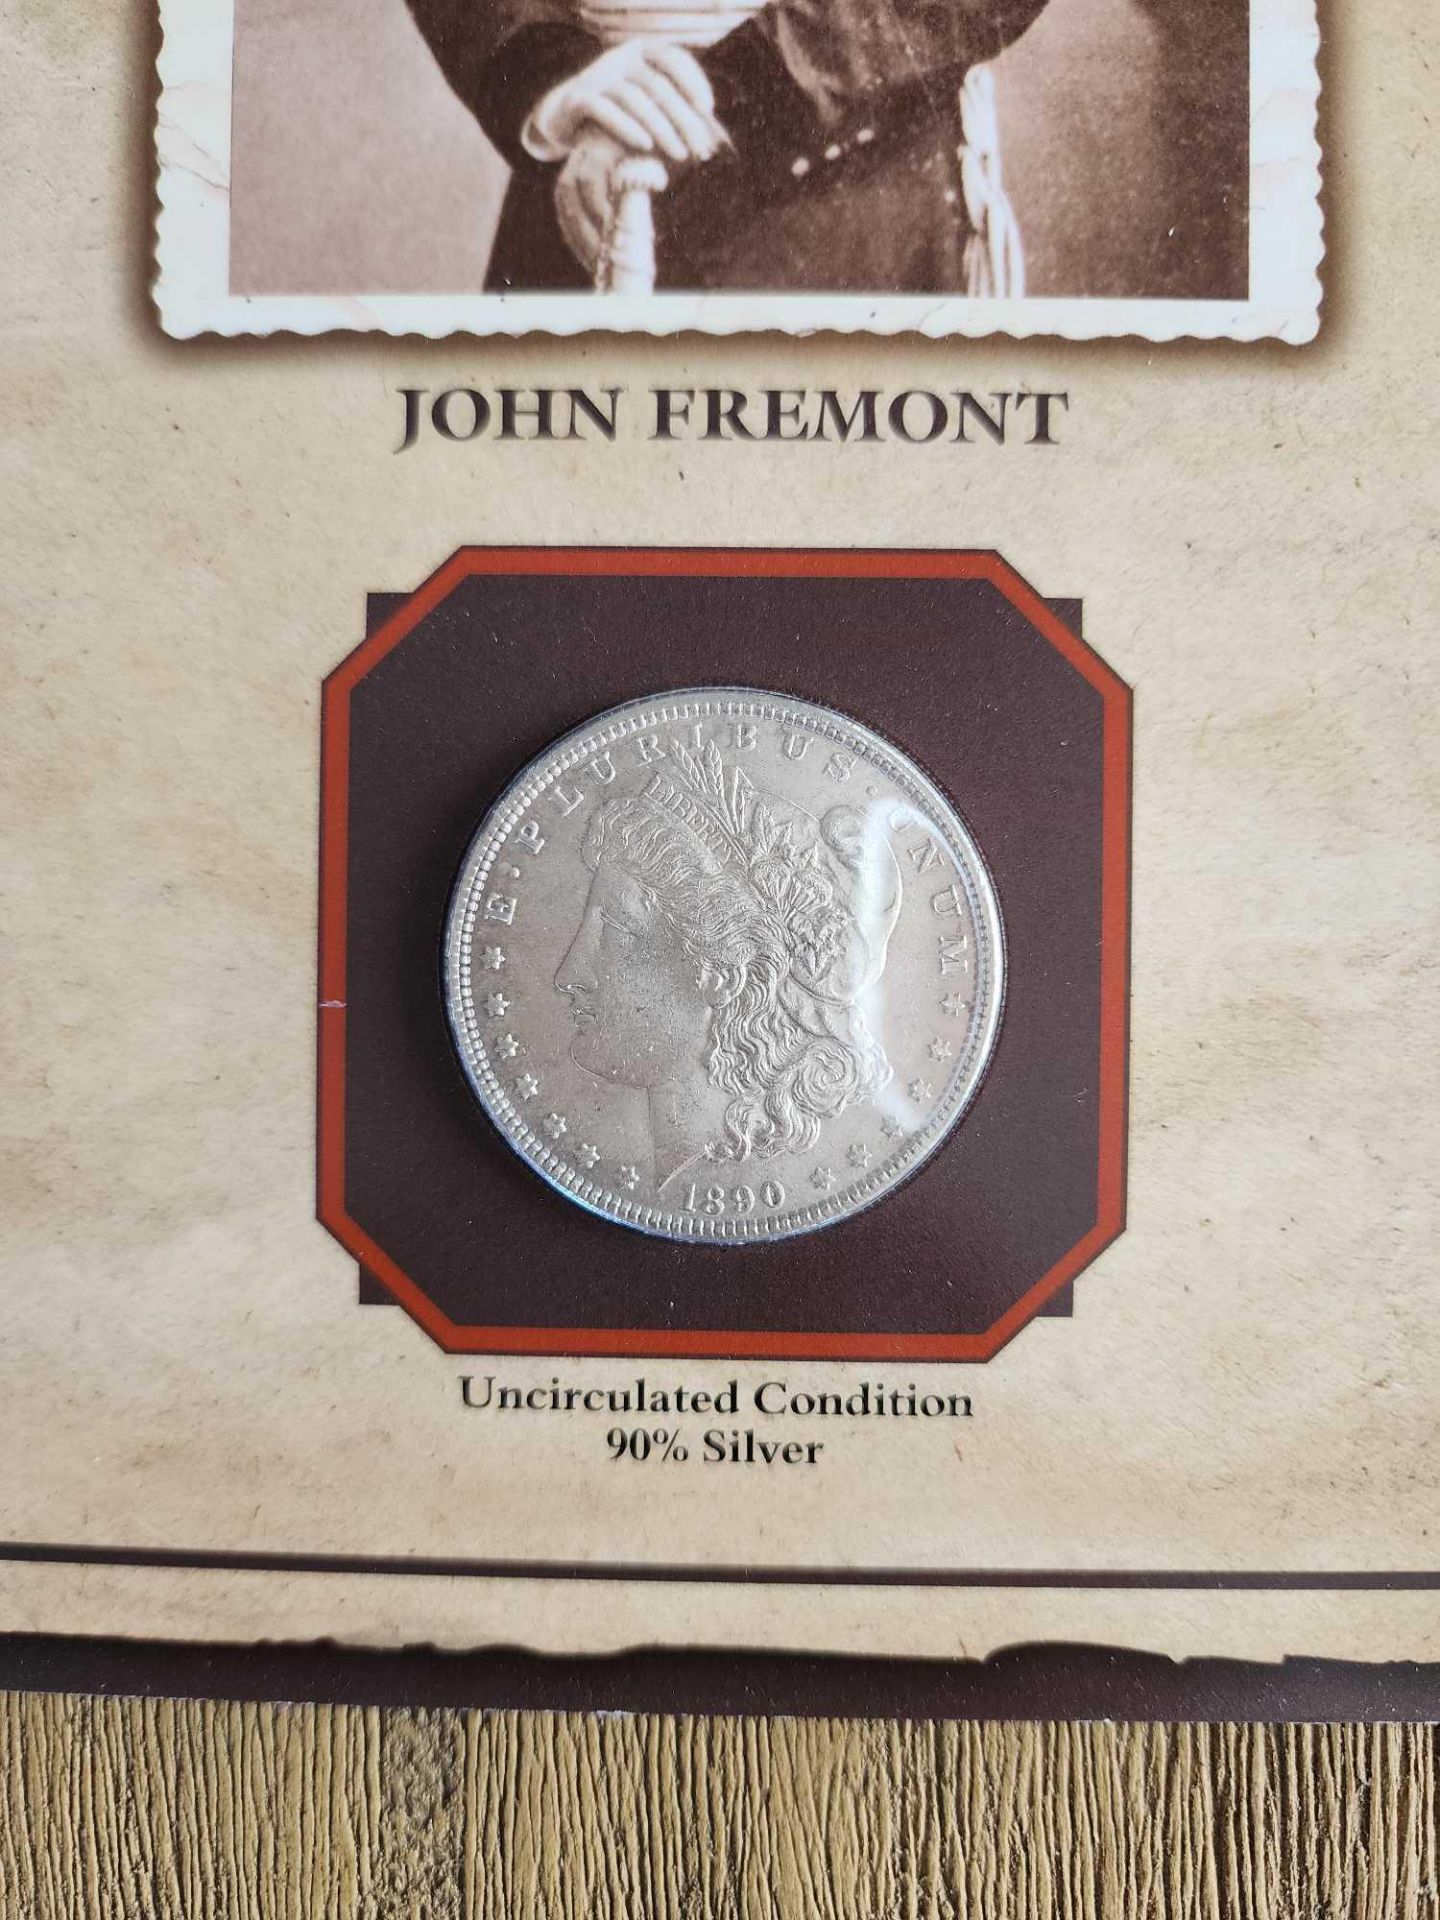 1890 Morgan Dollar Uncirculated condition with John Fremont Stamp and Facts - Image 10 of 10